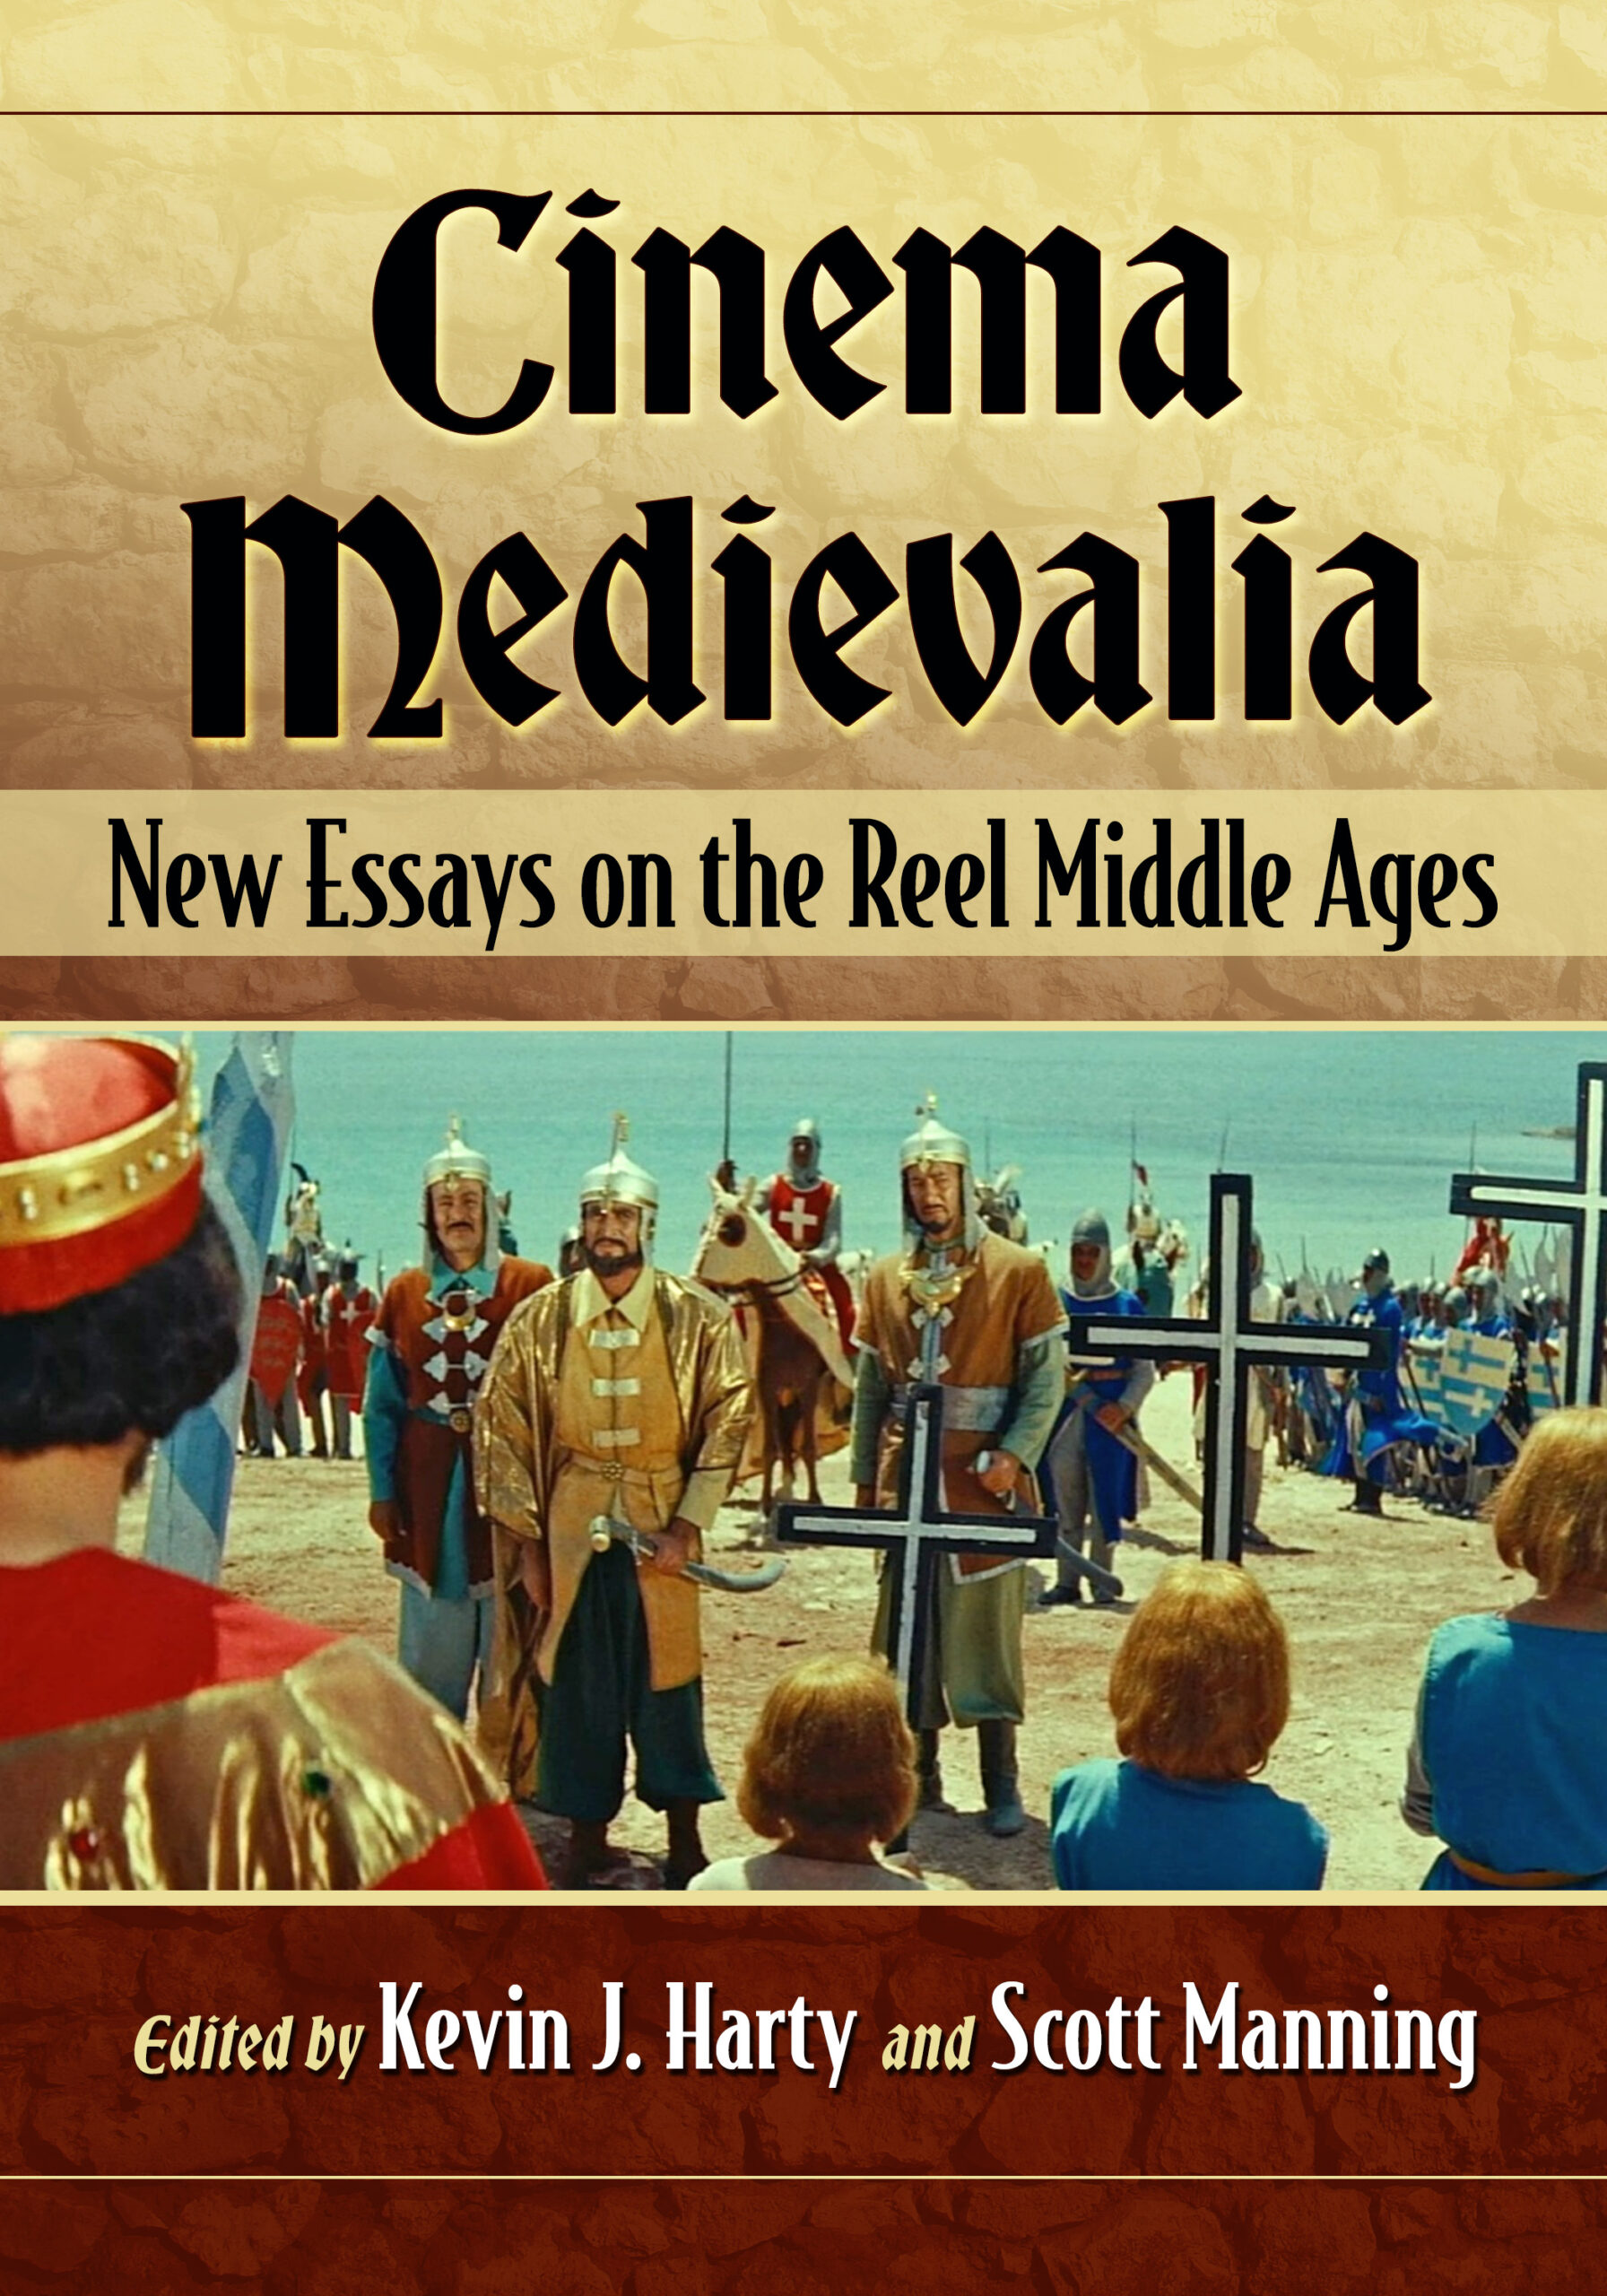 Cinema Medievalia: New Essays on the Reel Middle Ages edited by Kevin J. Harty and Scott Manning